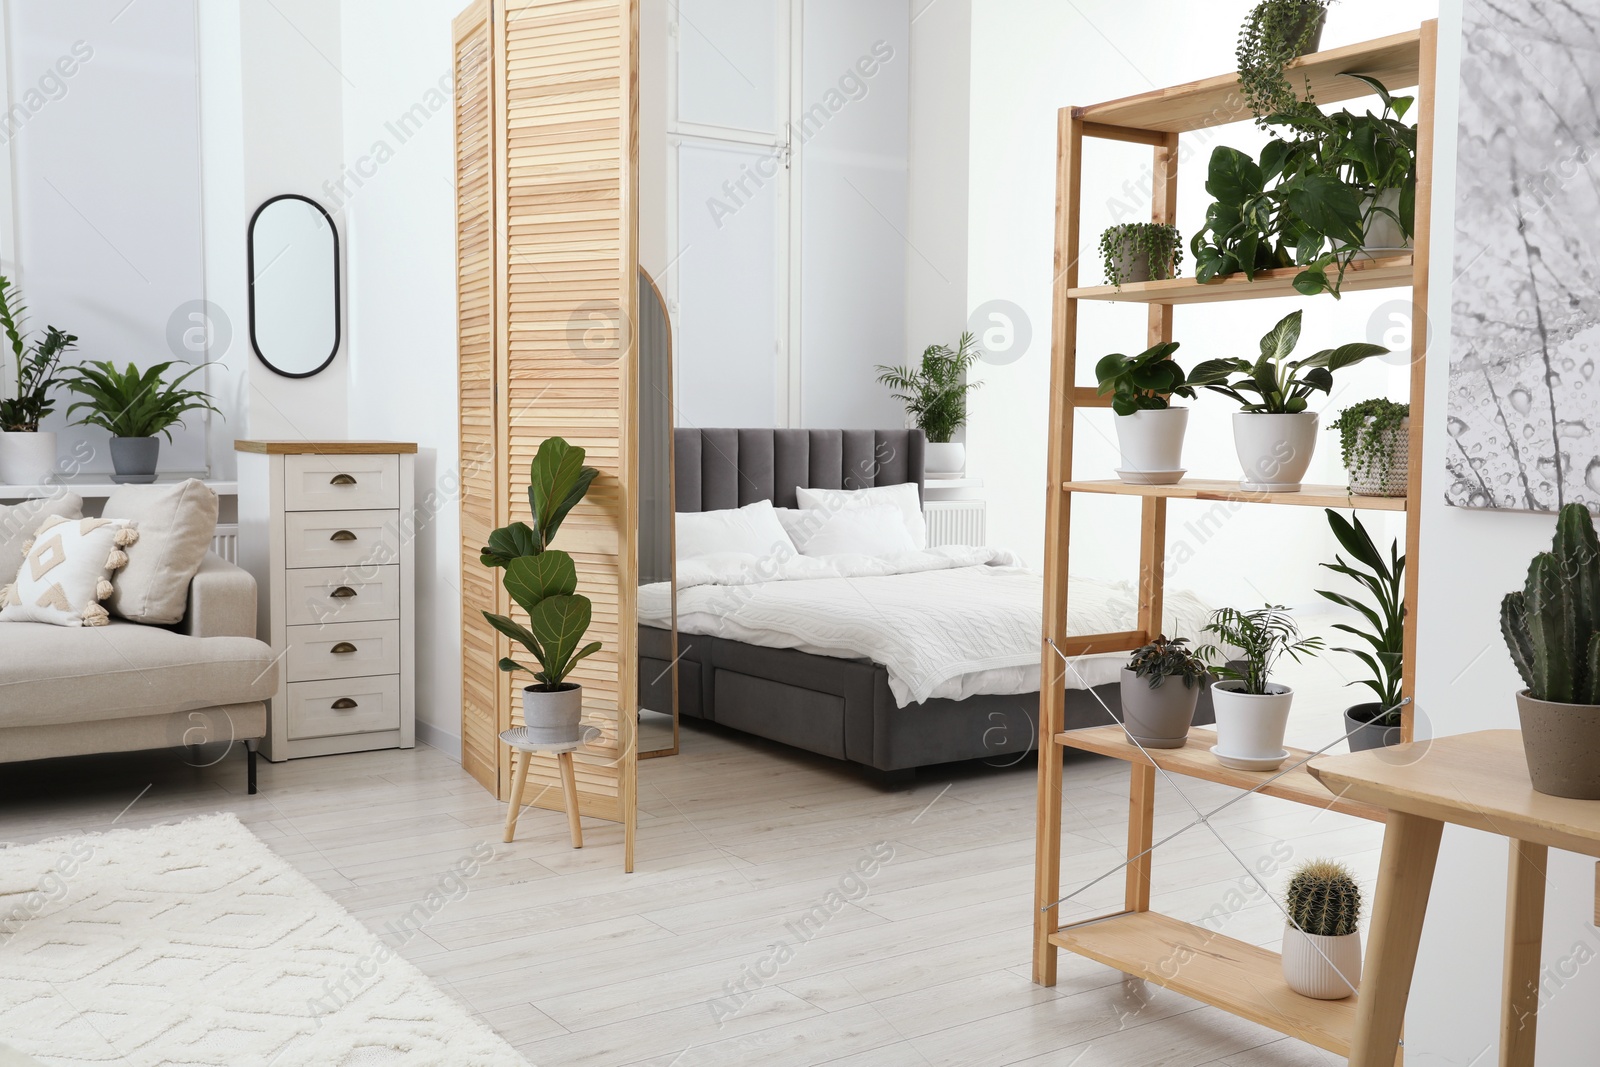 Photo of Stylish room with different potted green plants on shelving unit and comfortable bed